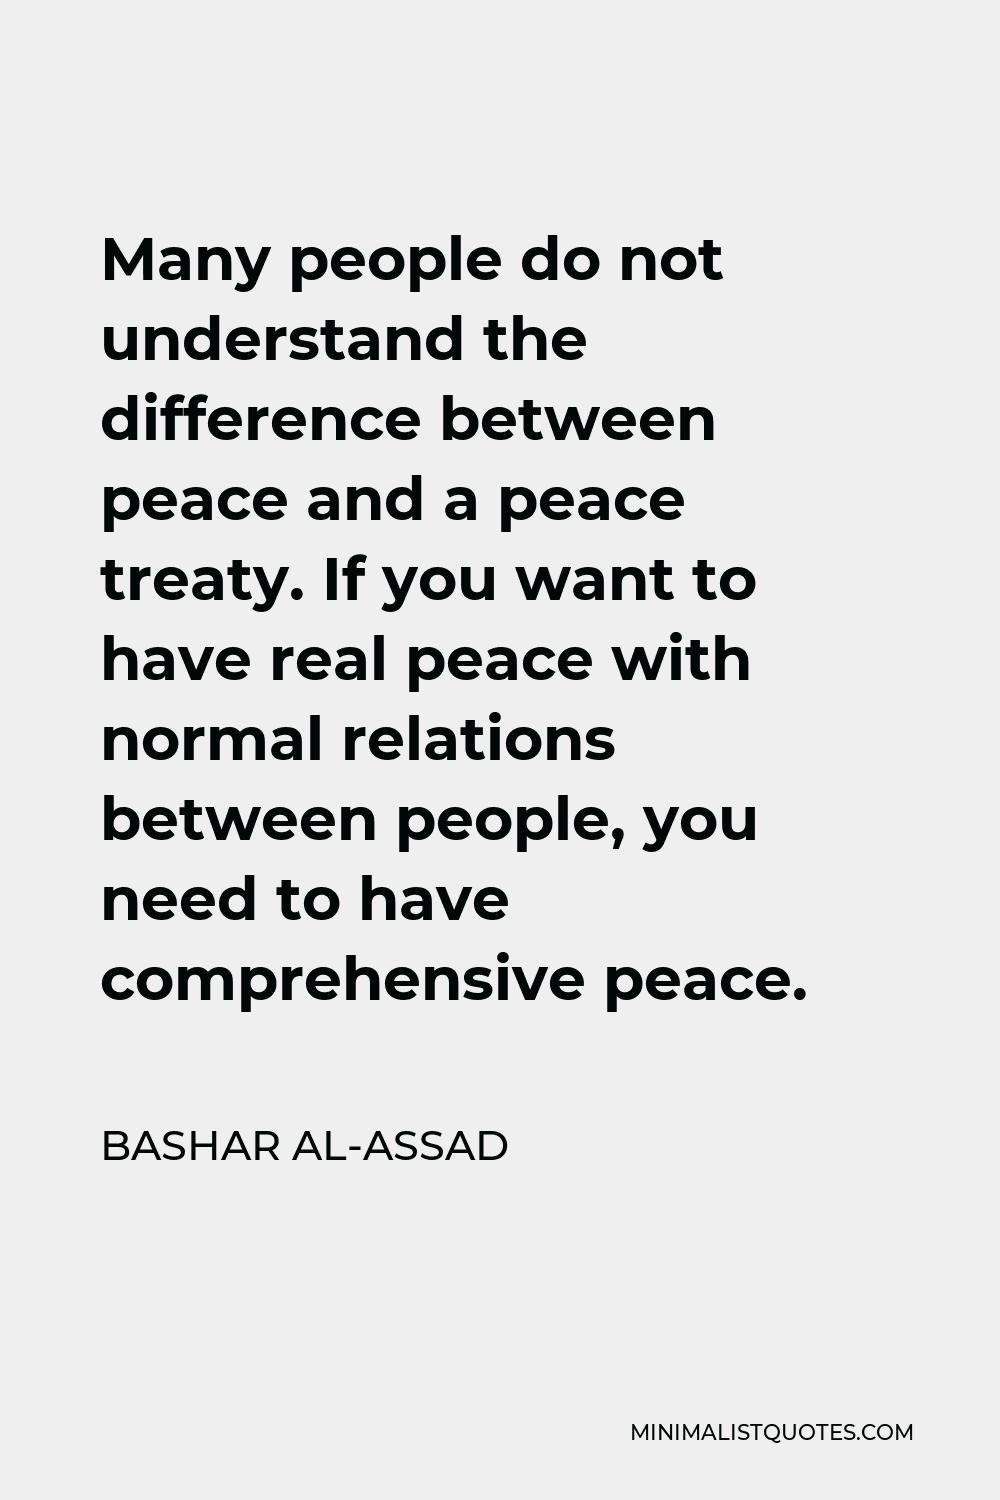 Bashar al-Assad Quote - Many people do not understand the difference between peace and a peace treaty. If you want to have real peace with normal relations between people, you need to have comprehensive peace.